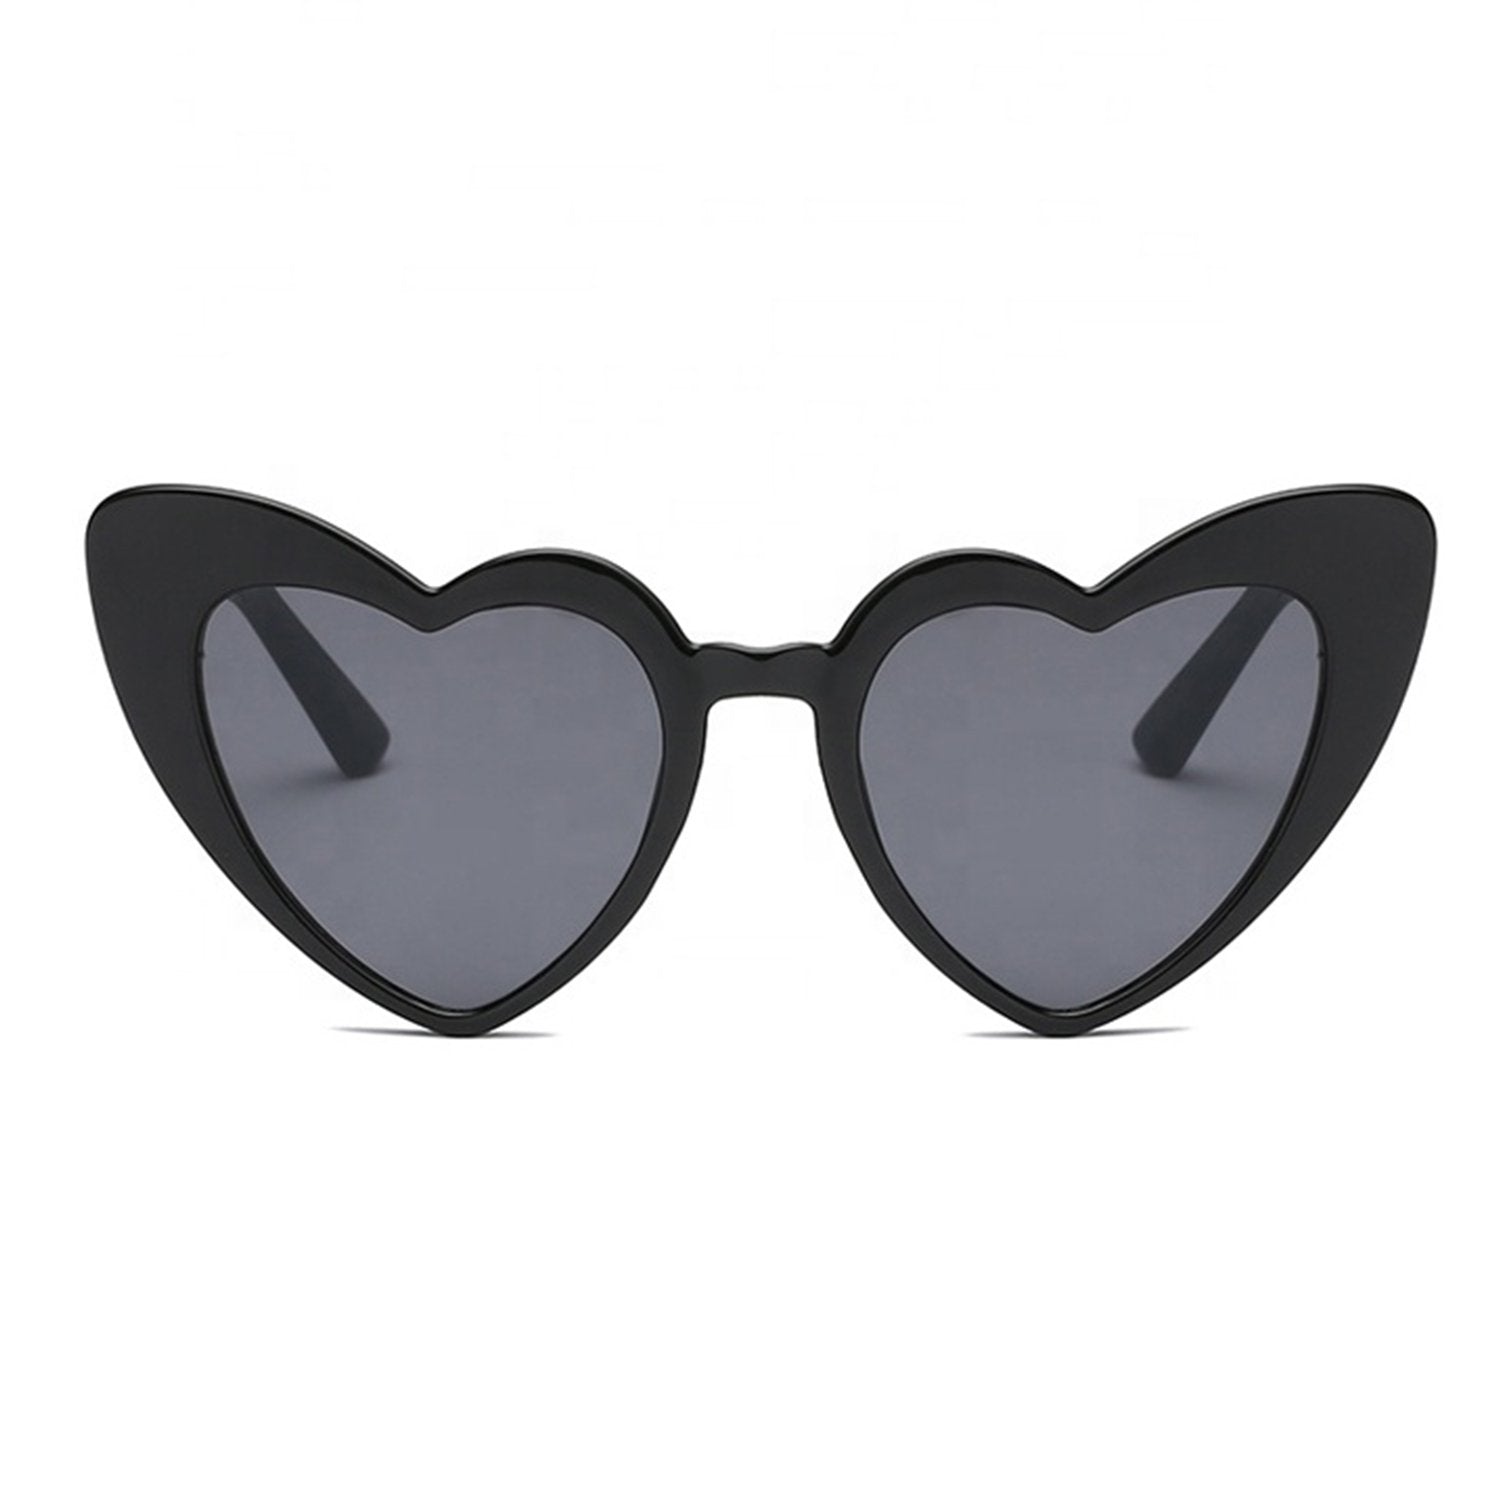 Heart sunglasses in black by Birdy Grey, front view